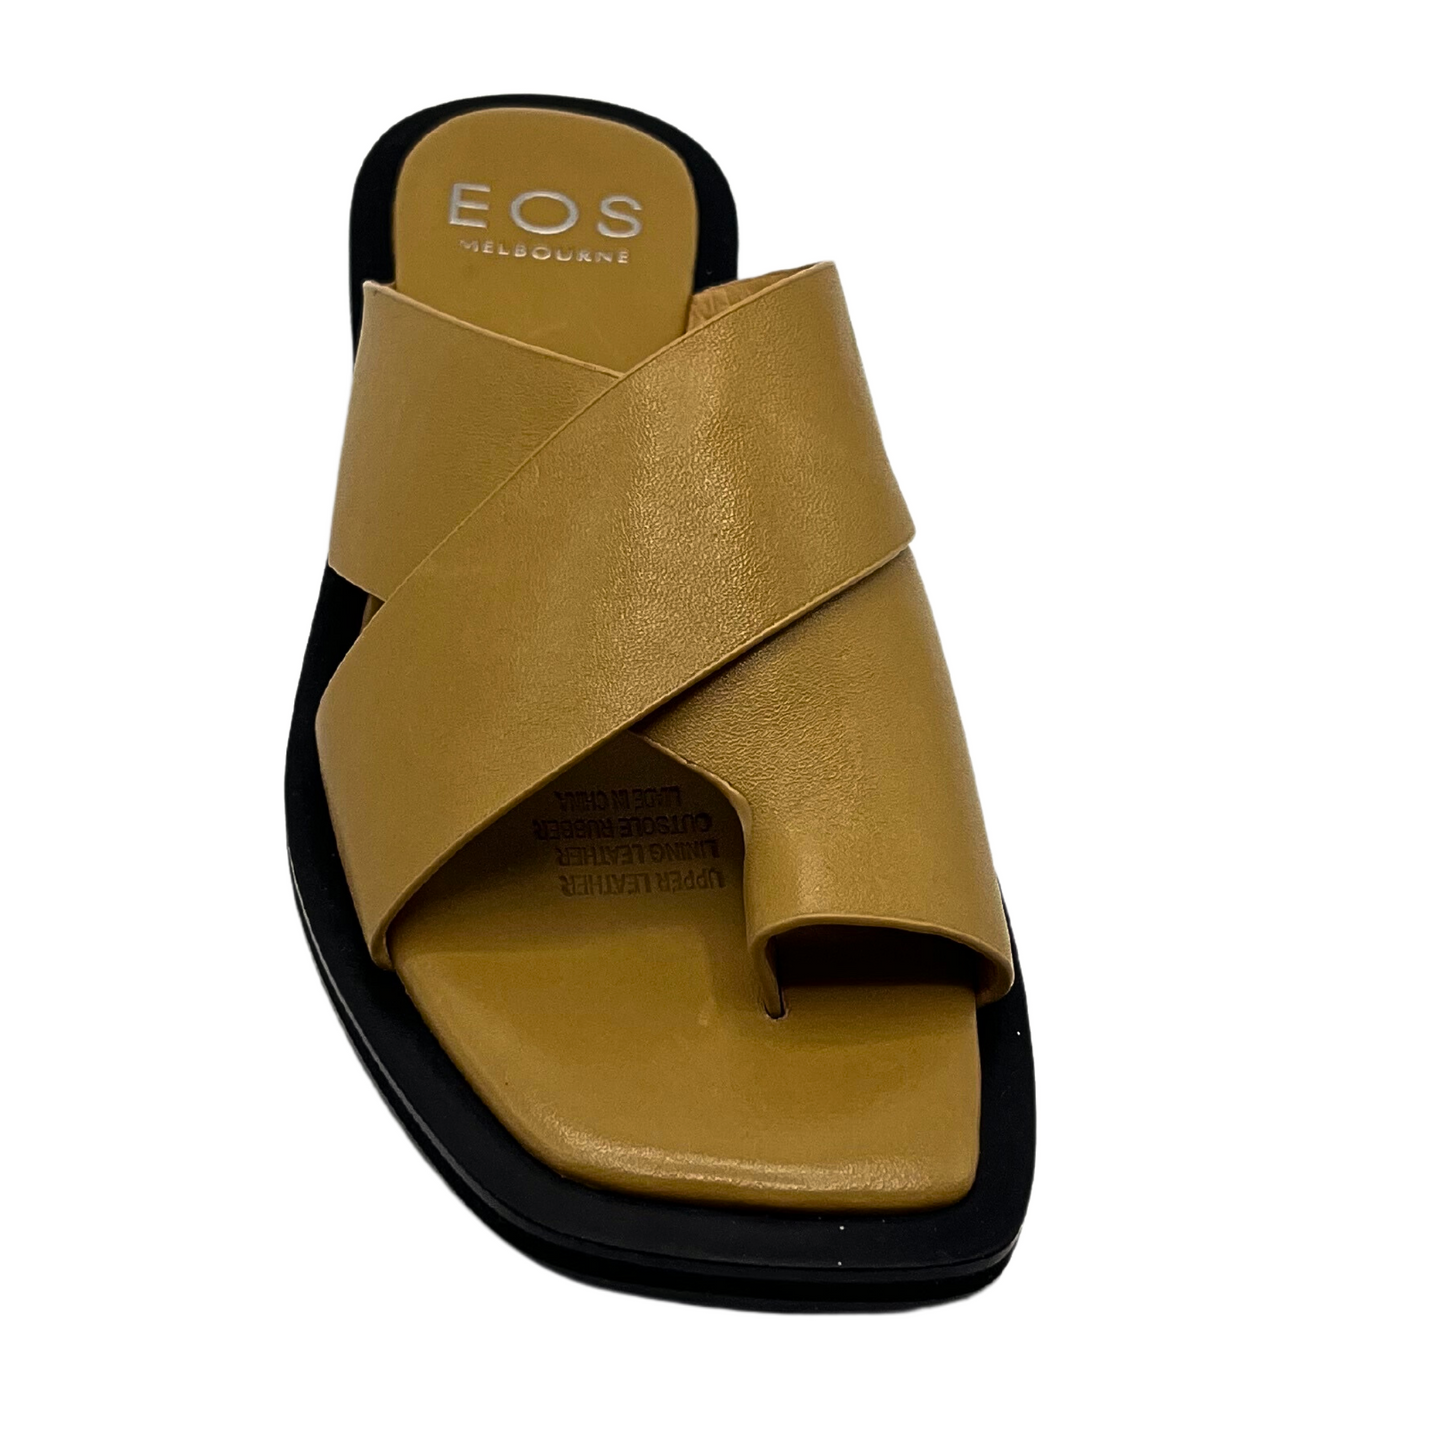 Tope down view of a leather slip on mule sandal.  Cross straps and toe sleeve keep it secure.  Shown in a  golden tan color